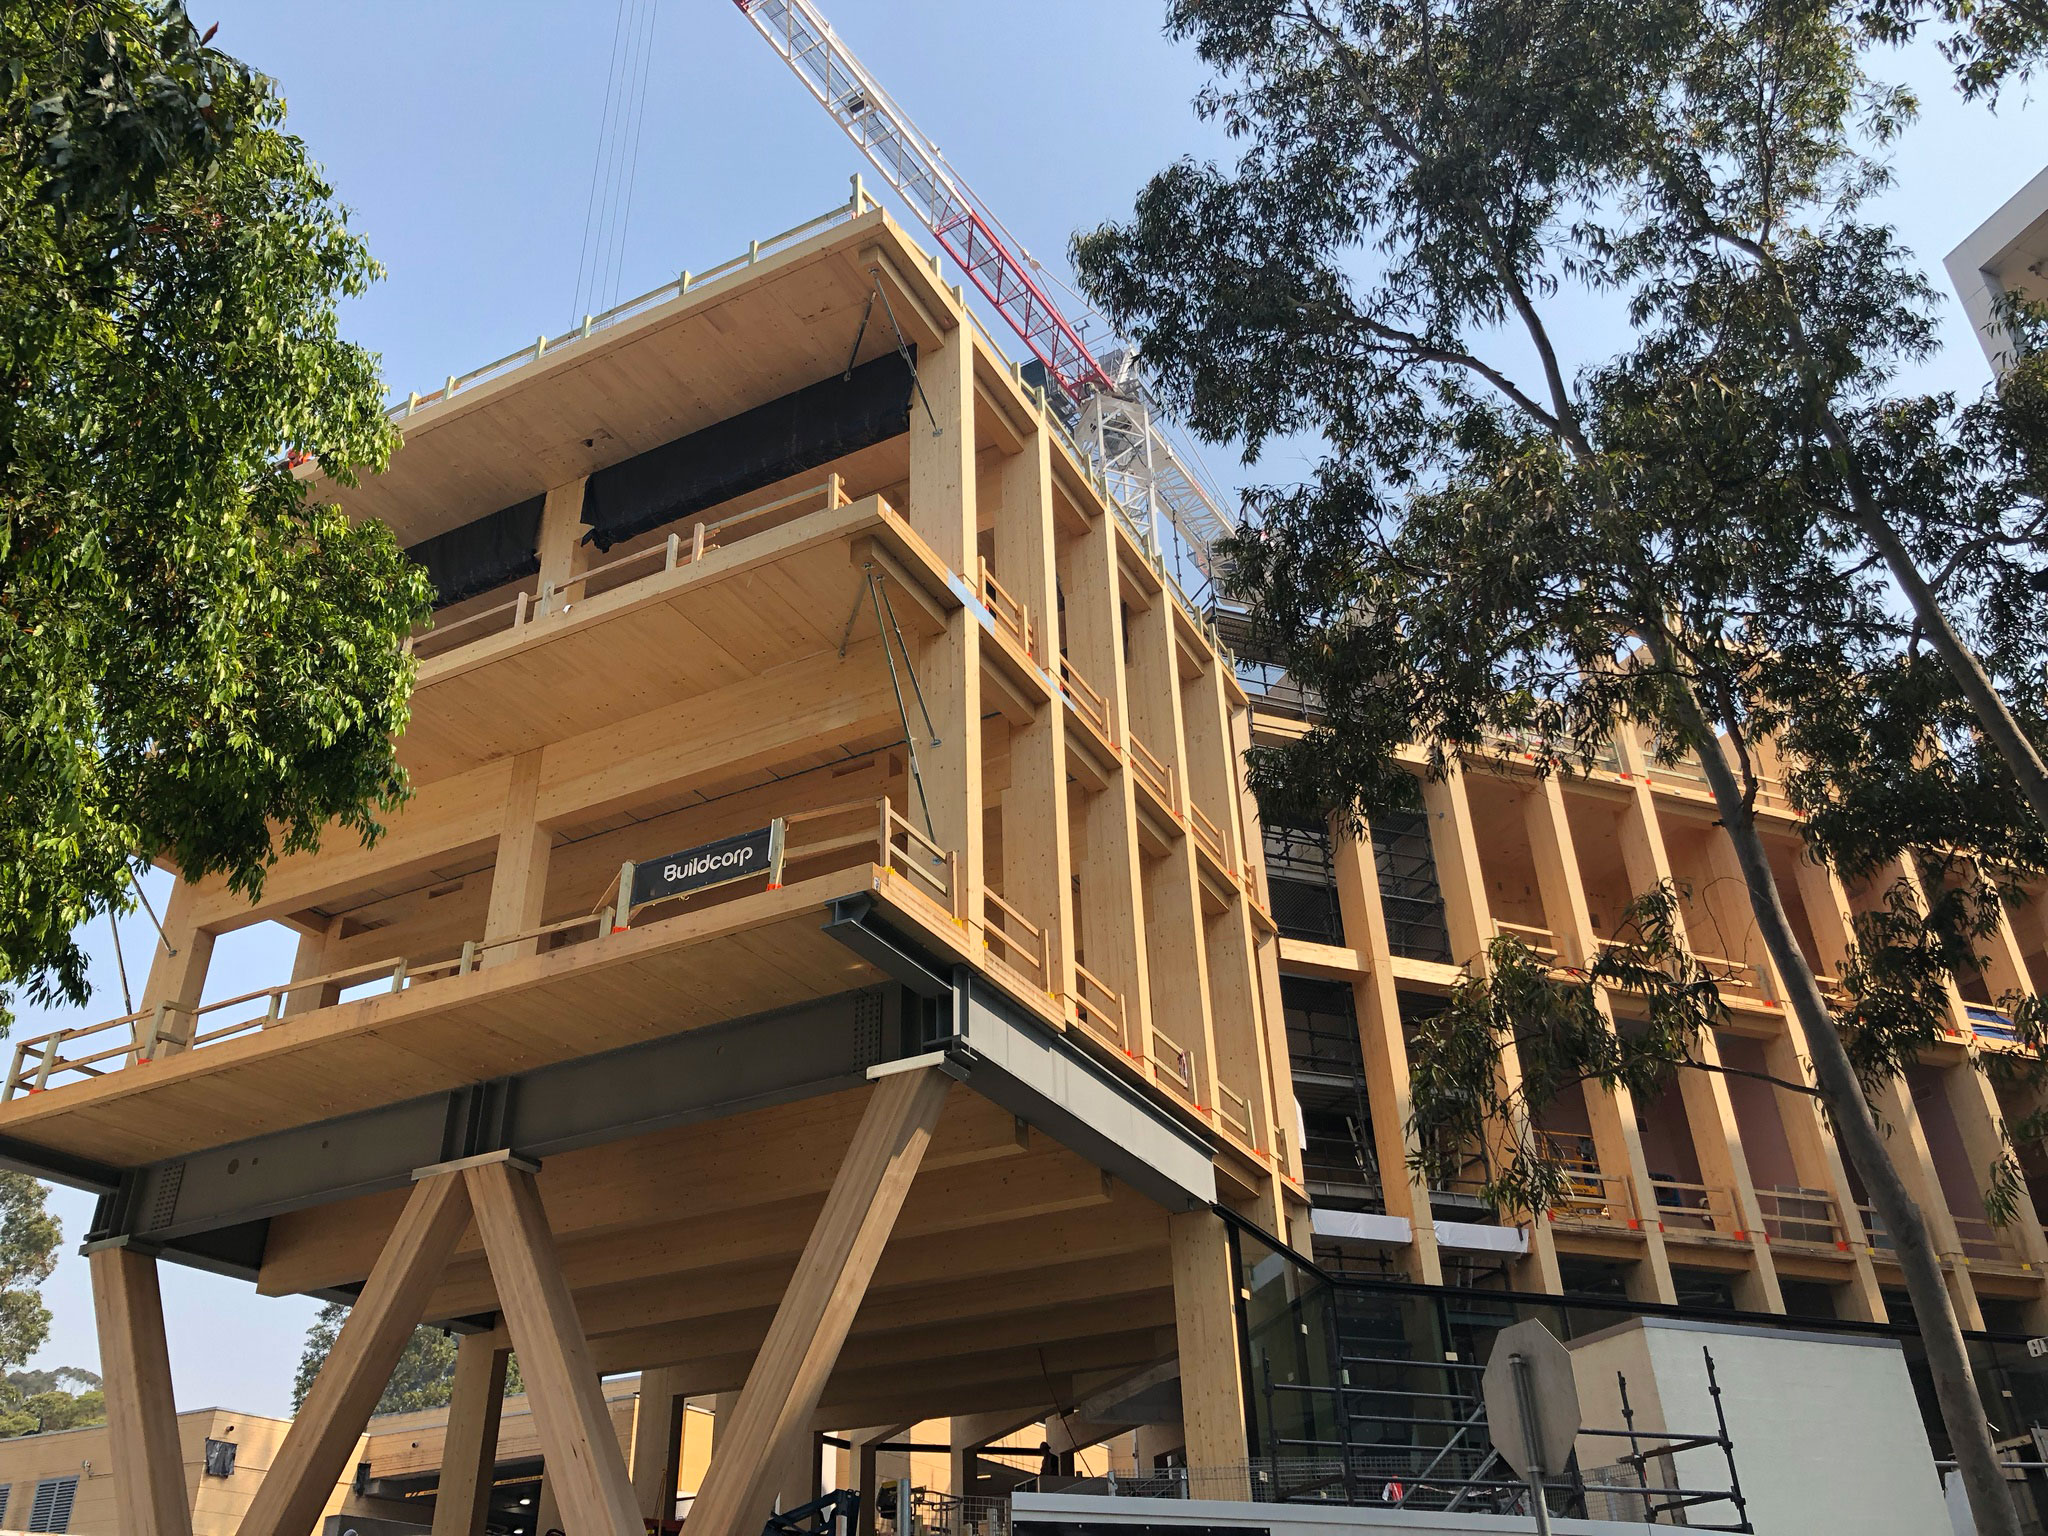 DfMA - the Macquarie University Clinical Education Building in construction